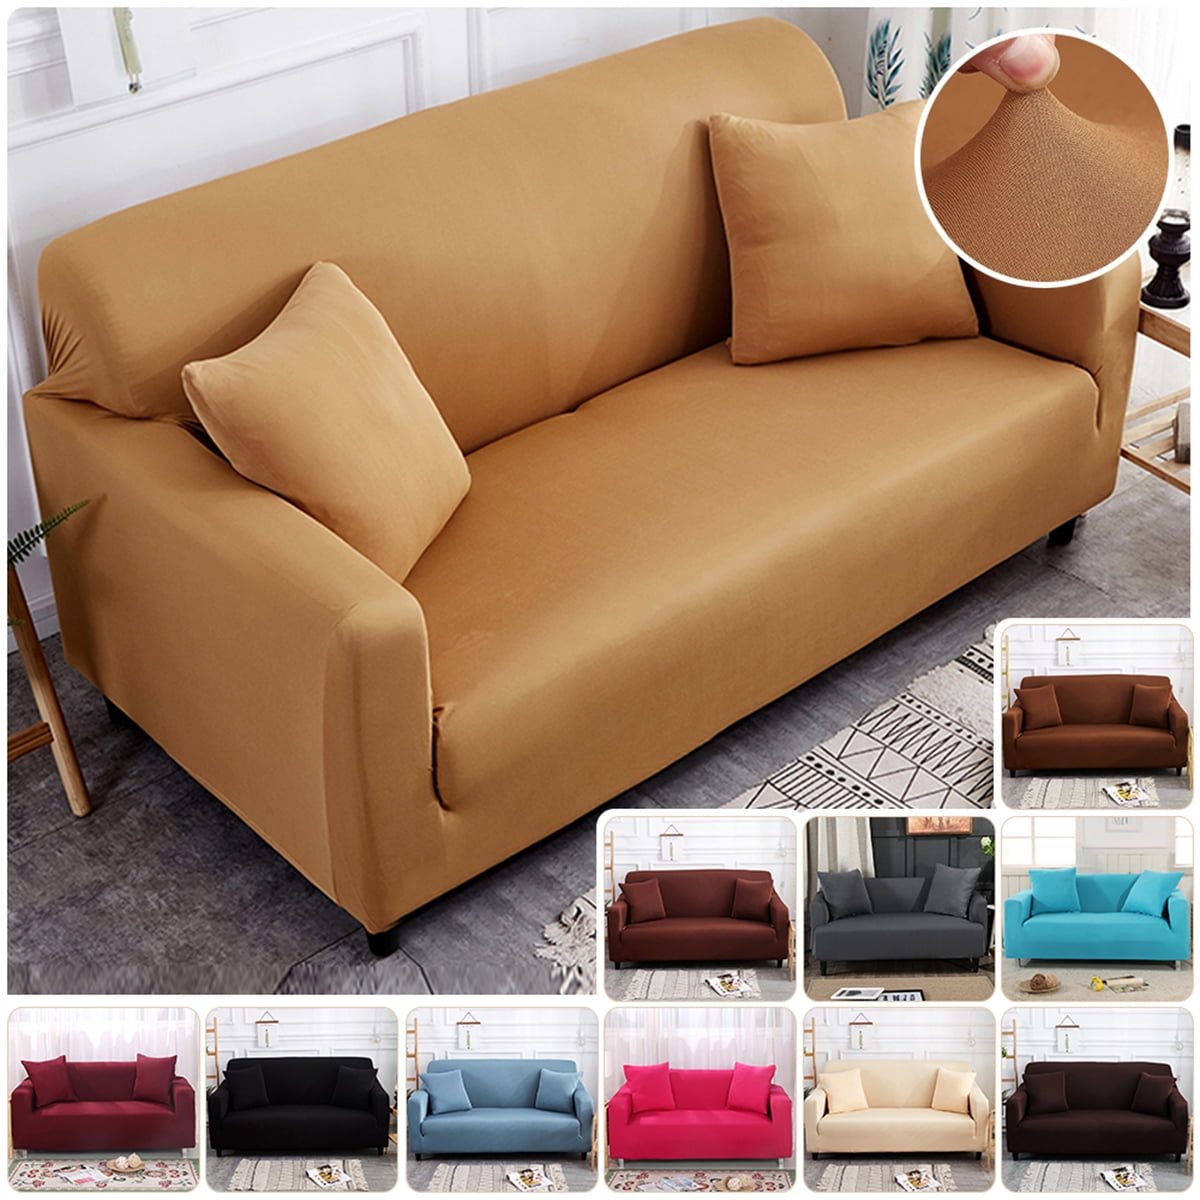 Details about   Stretch Sofa Slipcover Furniture Full Protector w/ Separate Cushion Couch Cover 